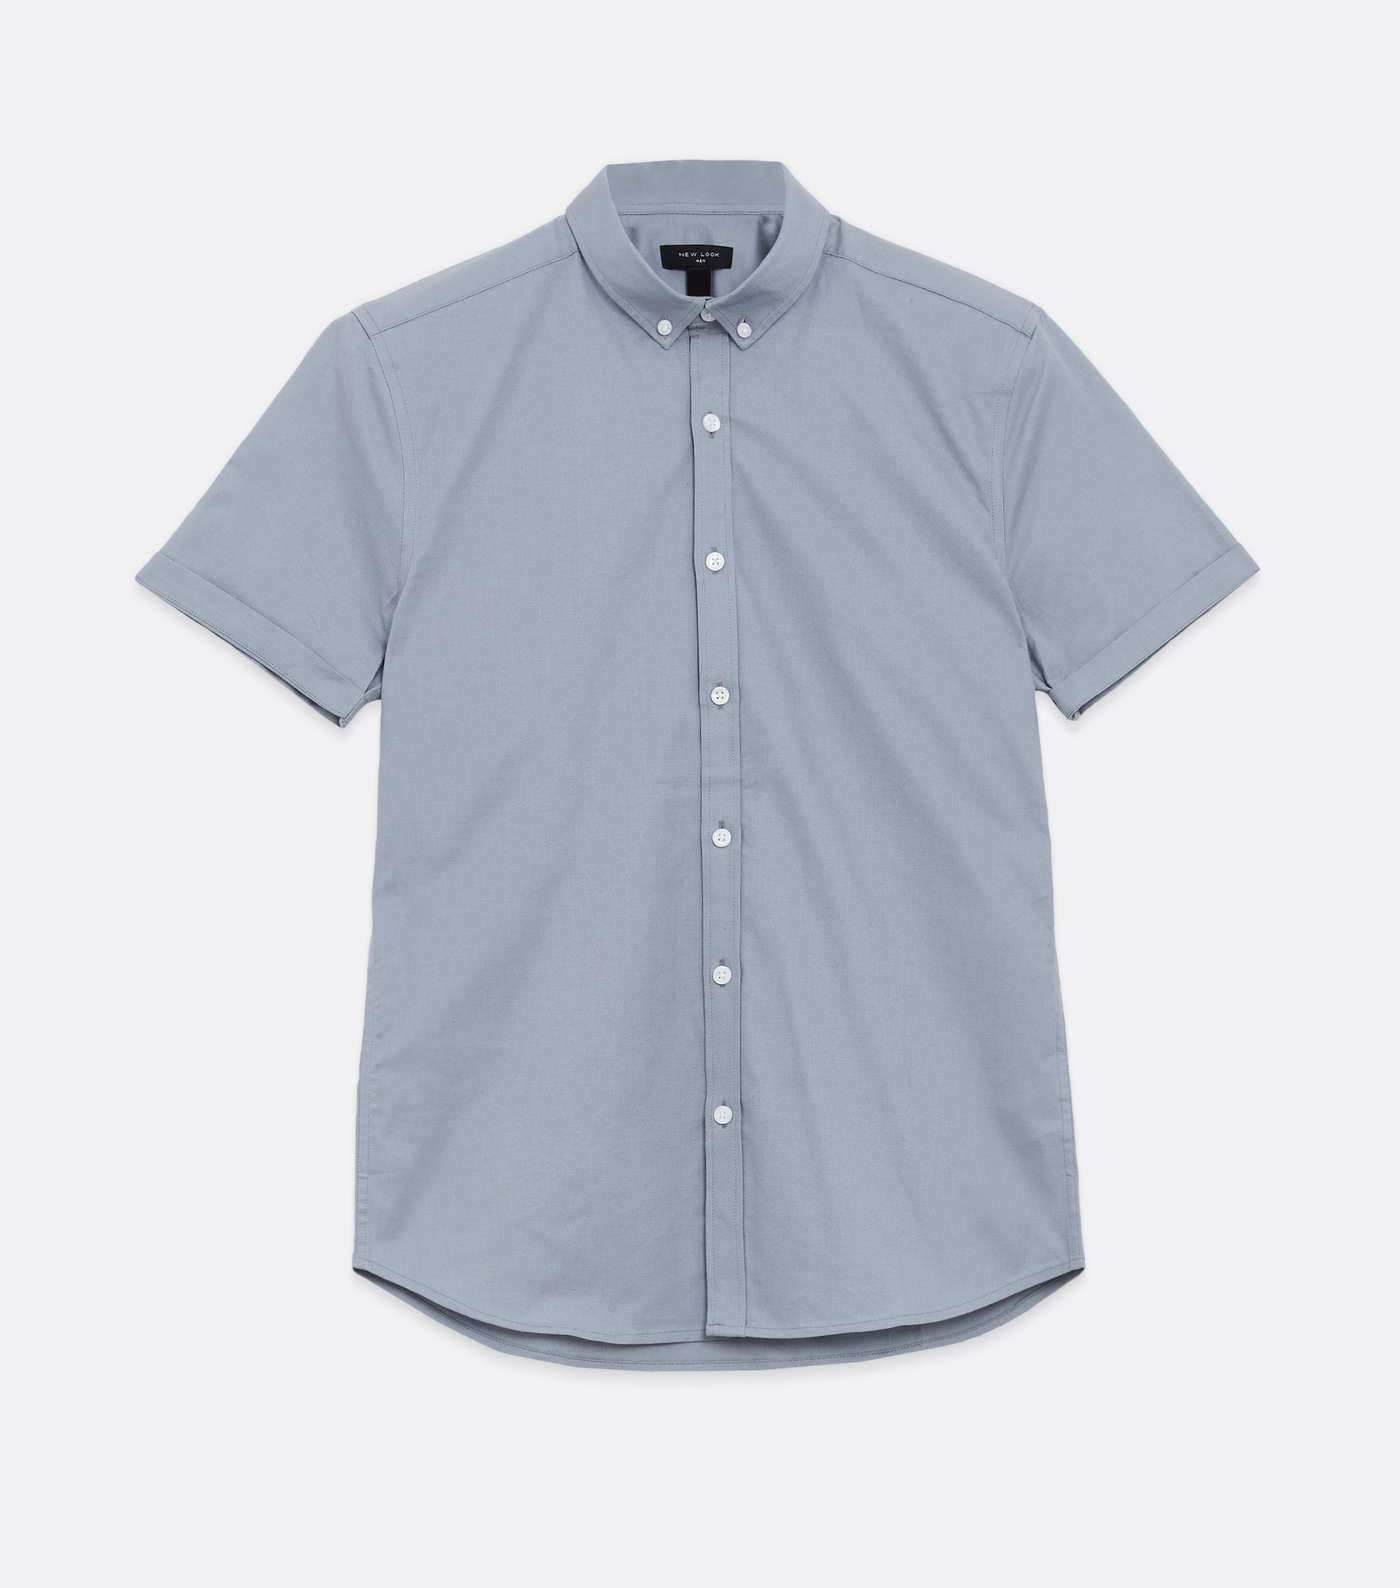 Pale Grey Short Sleeve Muscle Fit Oxford Shirt Image 5